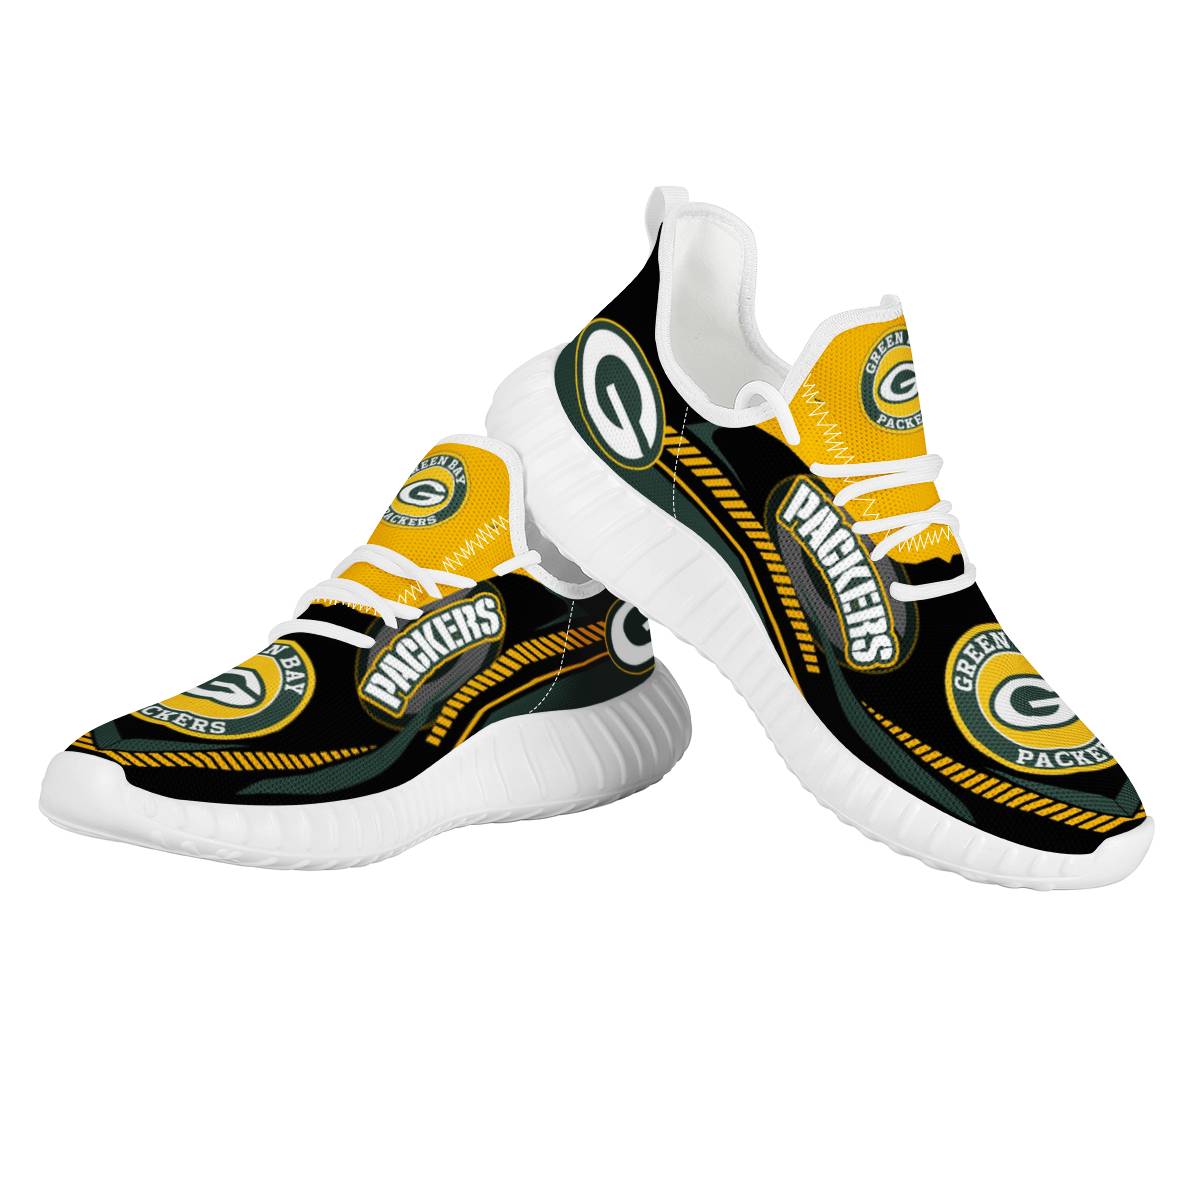 Men's Green Bay Packers Mesh Knit Sneakers/Shoes 015